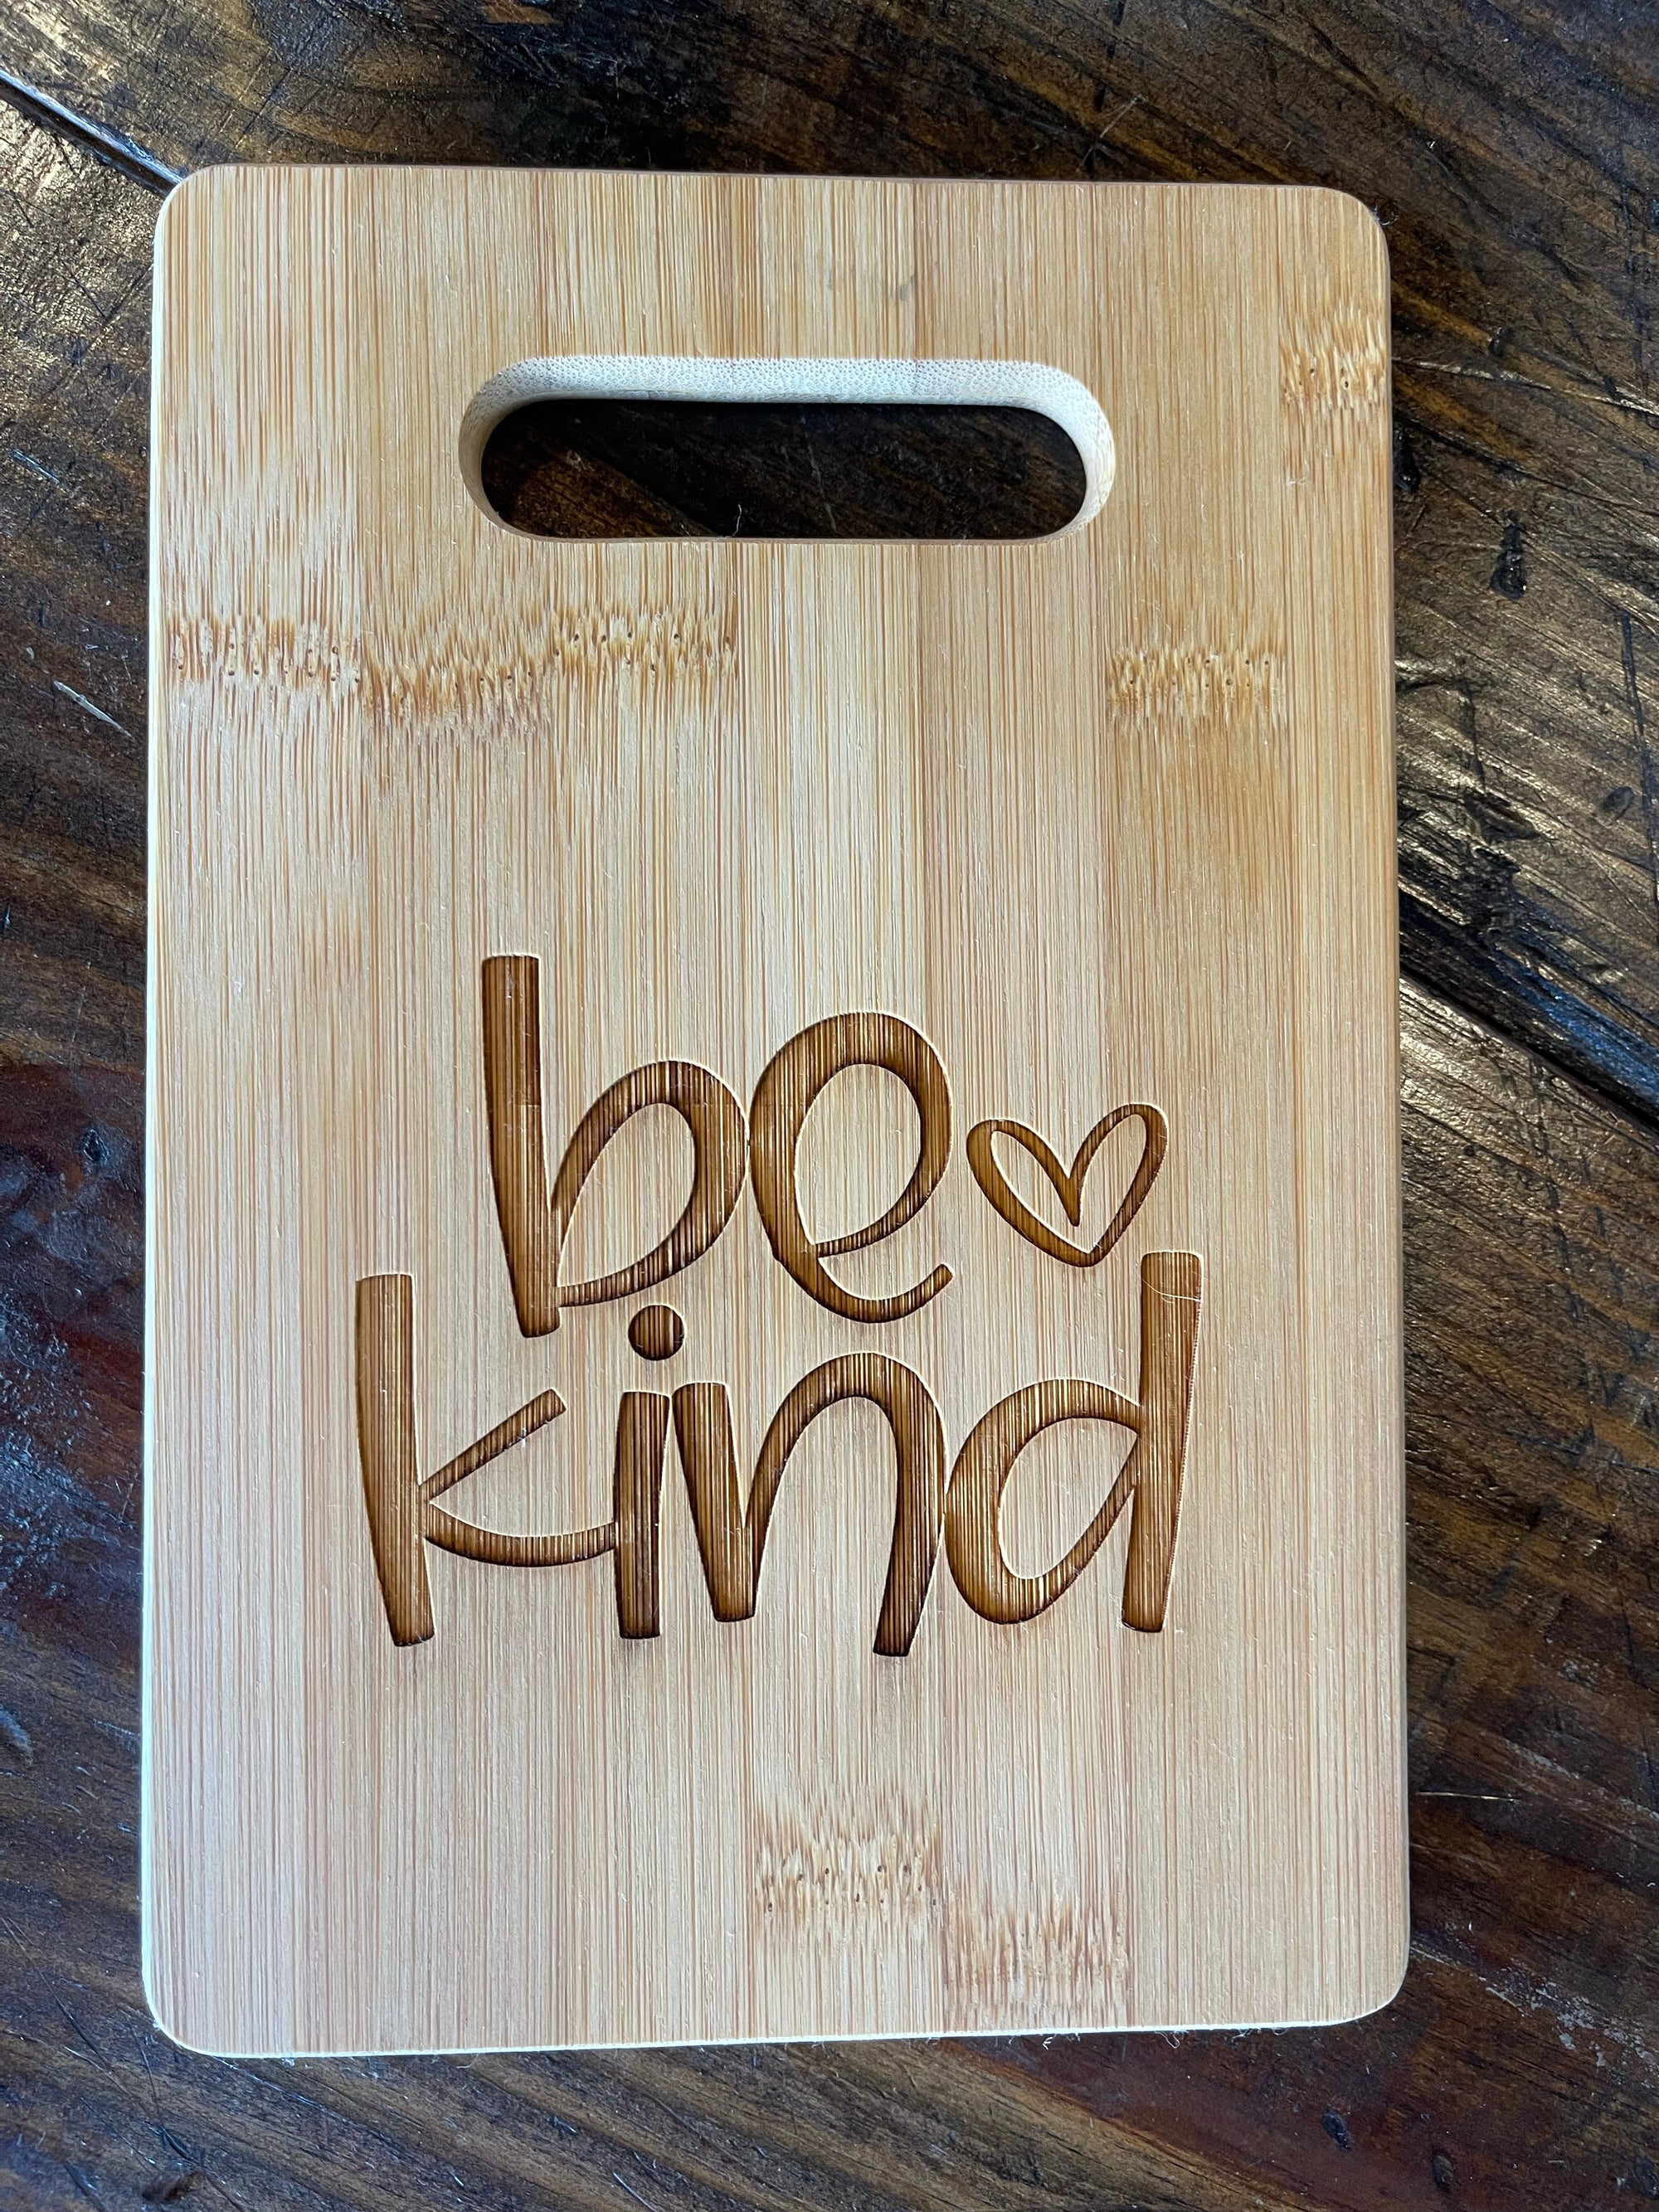 You Name It 10x14 Personalized Bamboo Cutting Board